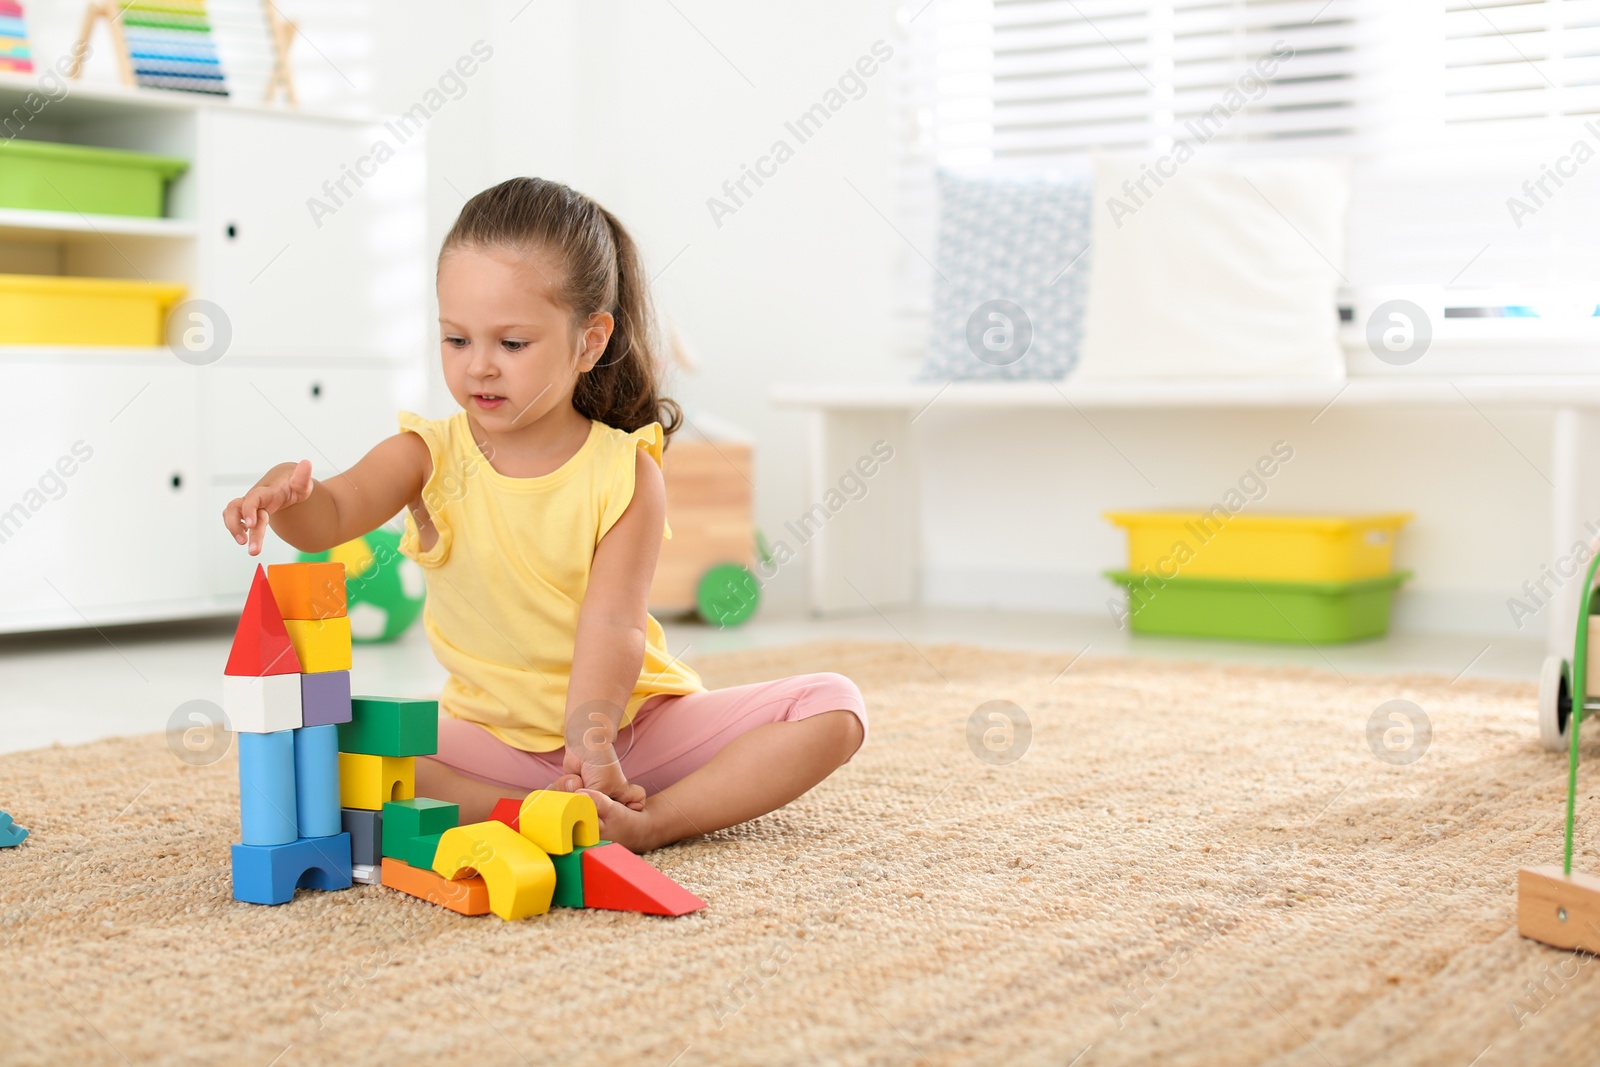 Photo of Cute little girl playing with colorful blocks on floor indoors, space for text. Educational toy